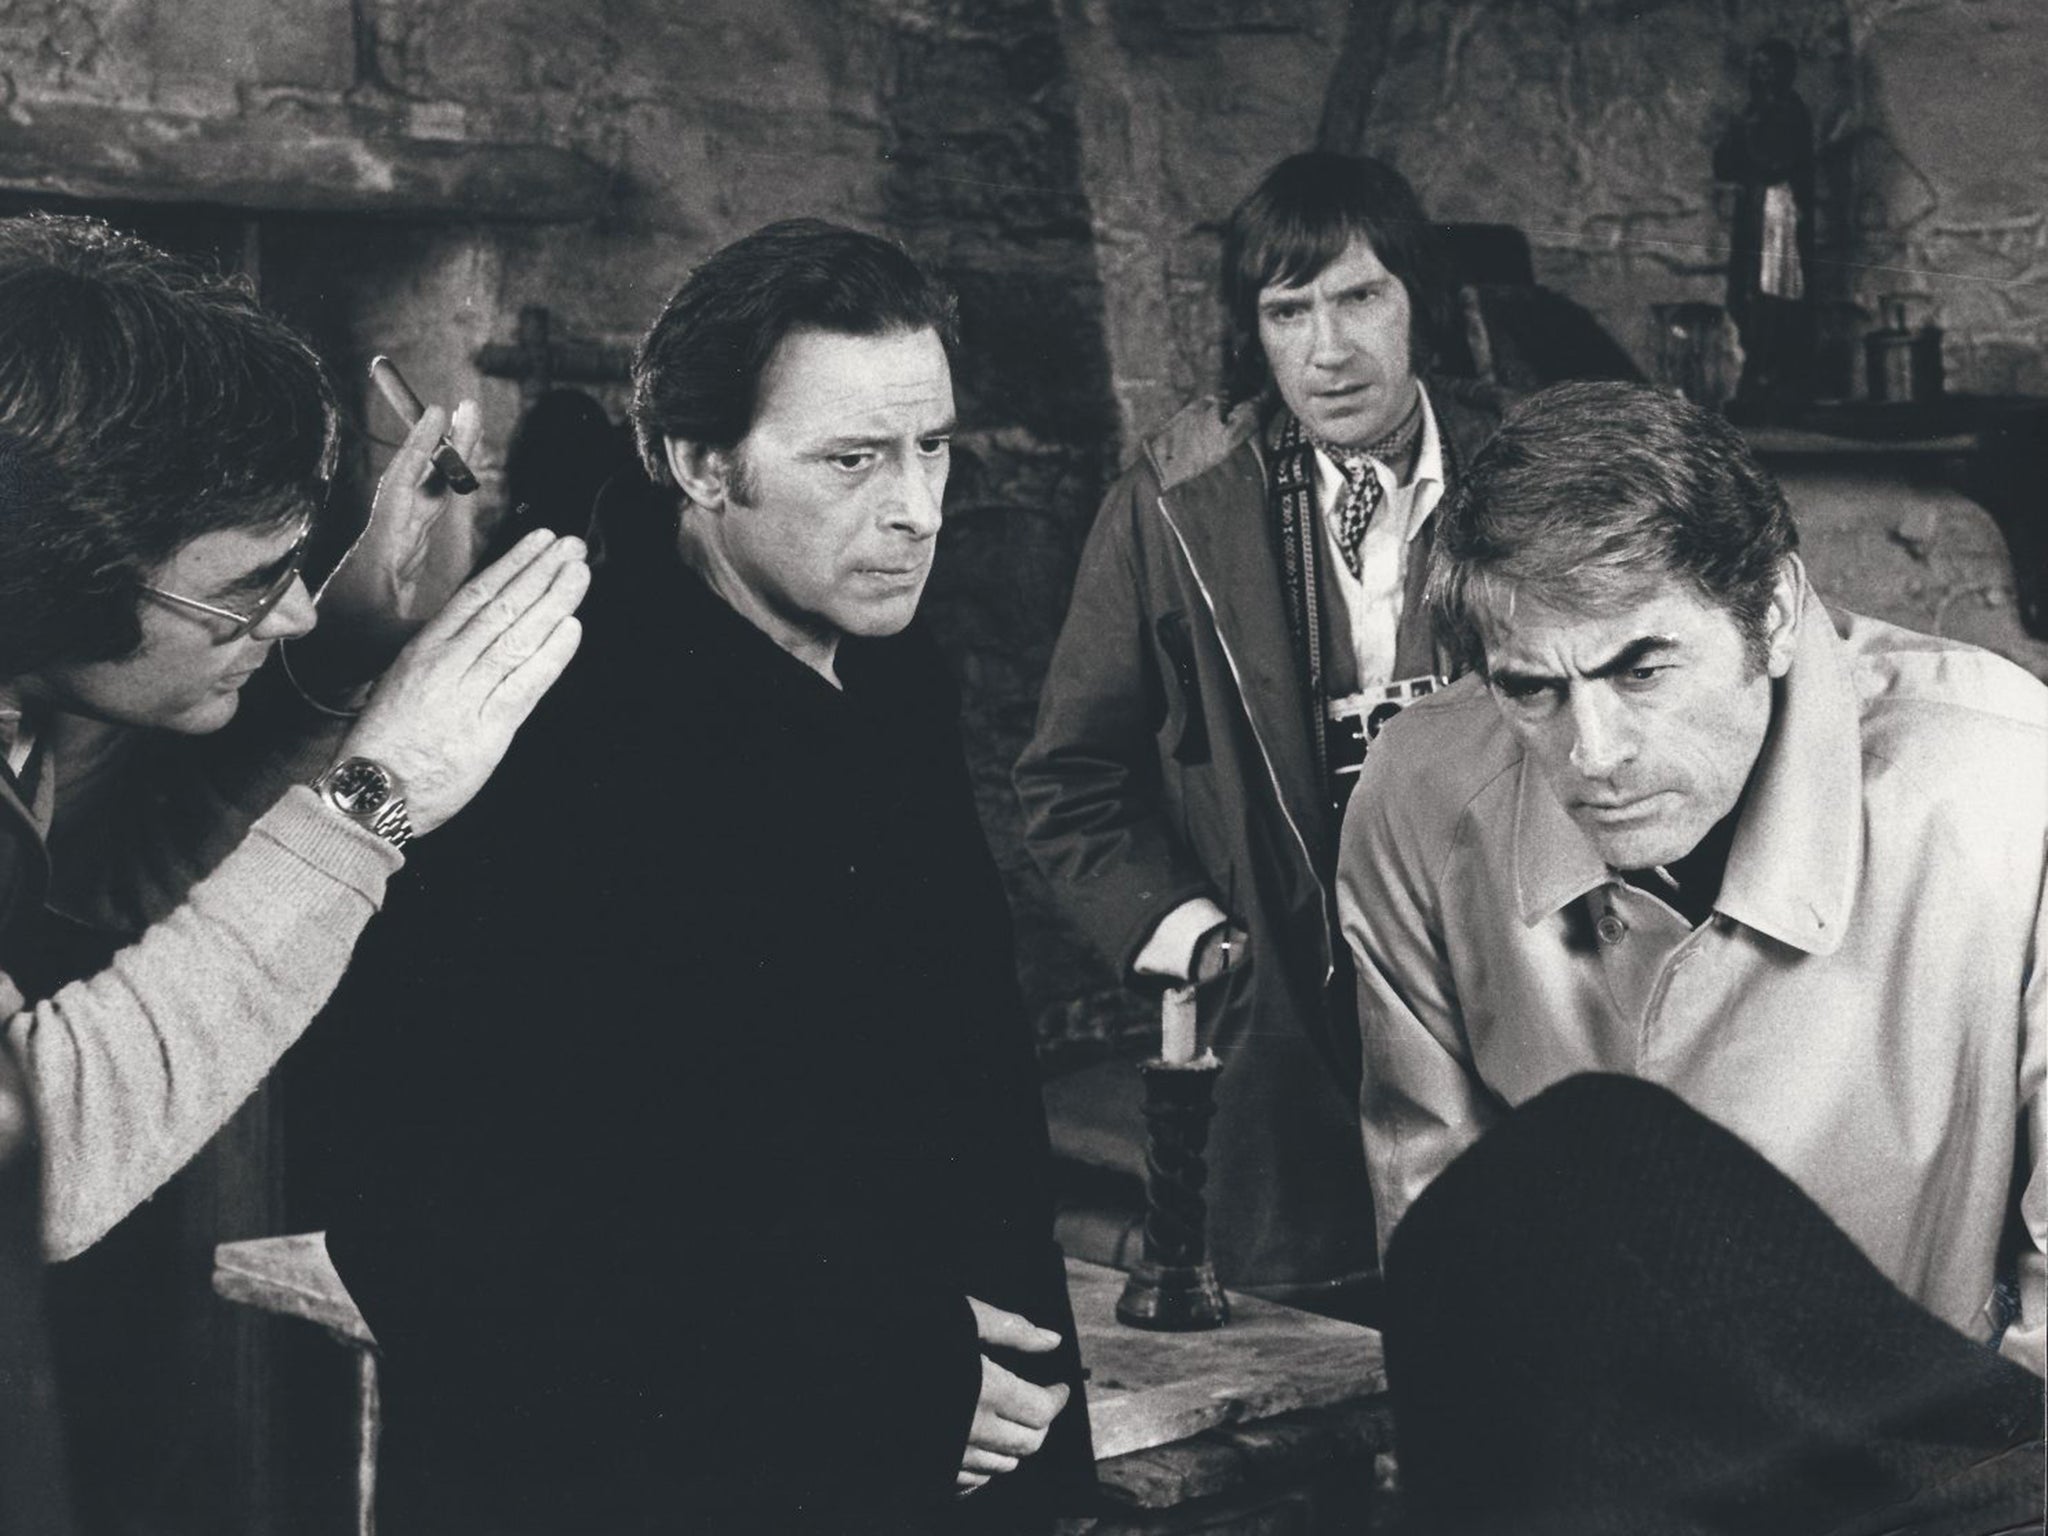 Rietti, left, as a monk in ‘The Omen’, with Gregory Peck, right, and David Warner, centre